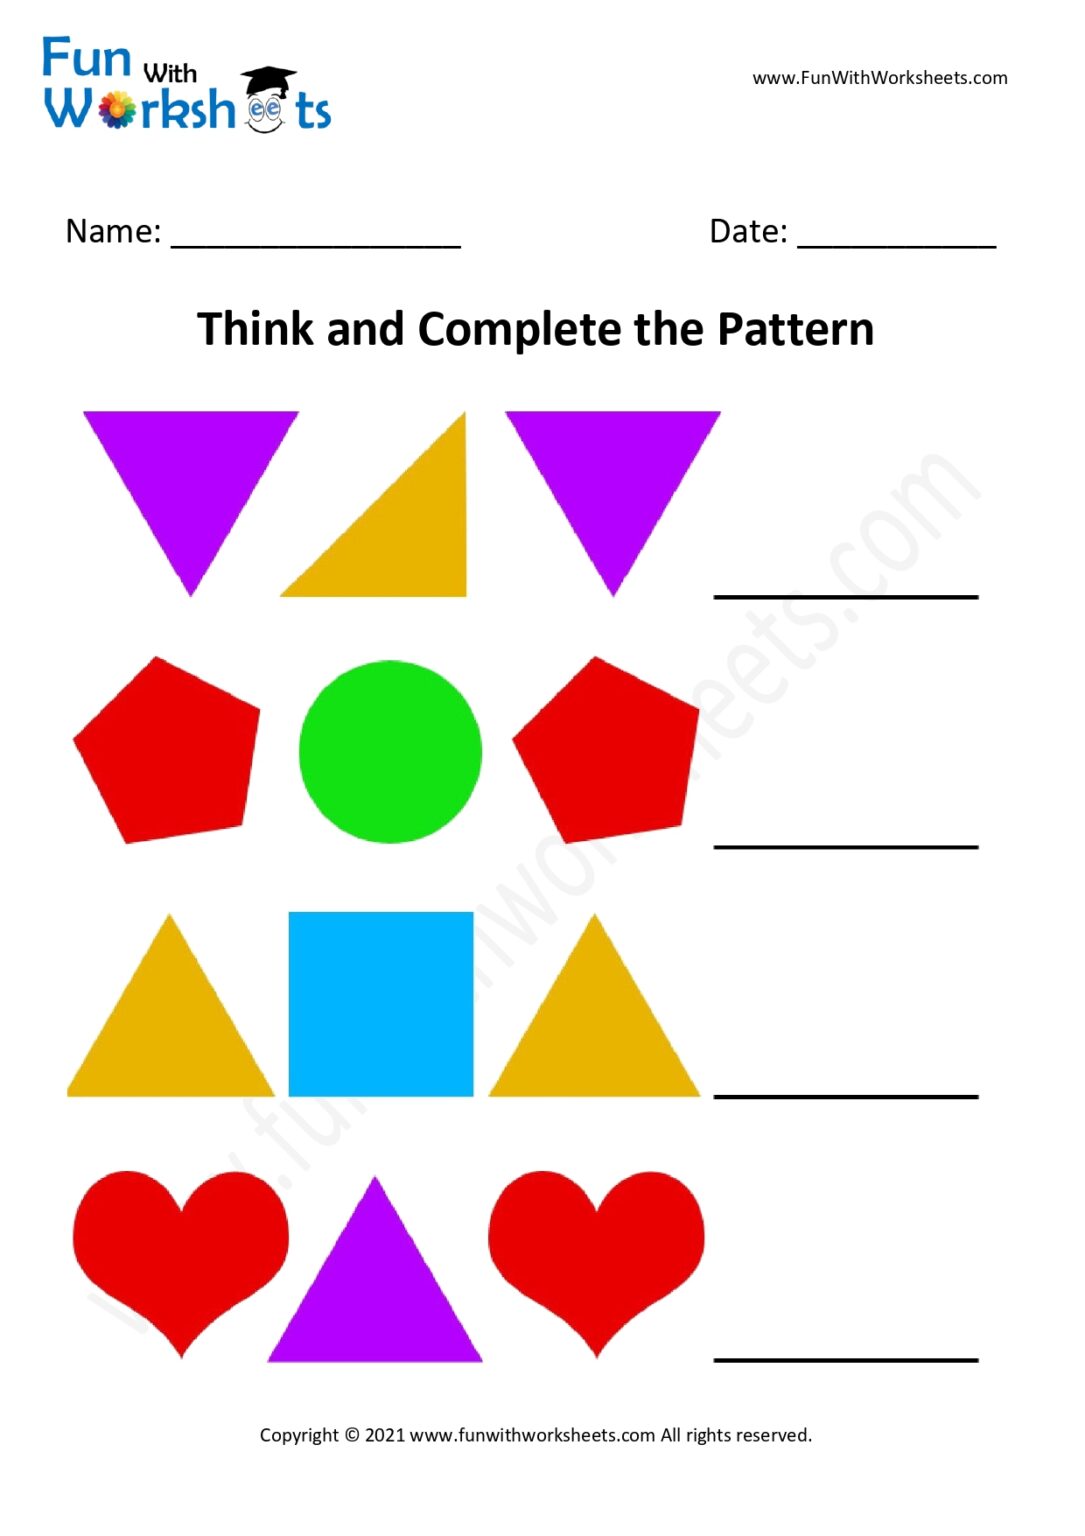 think-and-complete-the-pattern-activity-worksheet-6-free-printable-worksheet